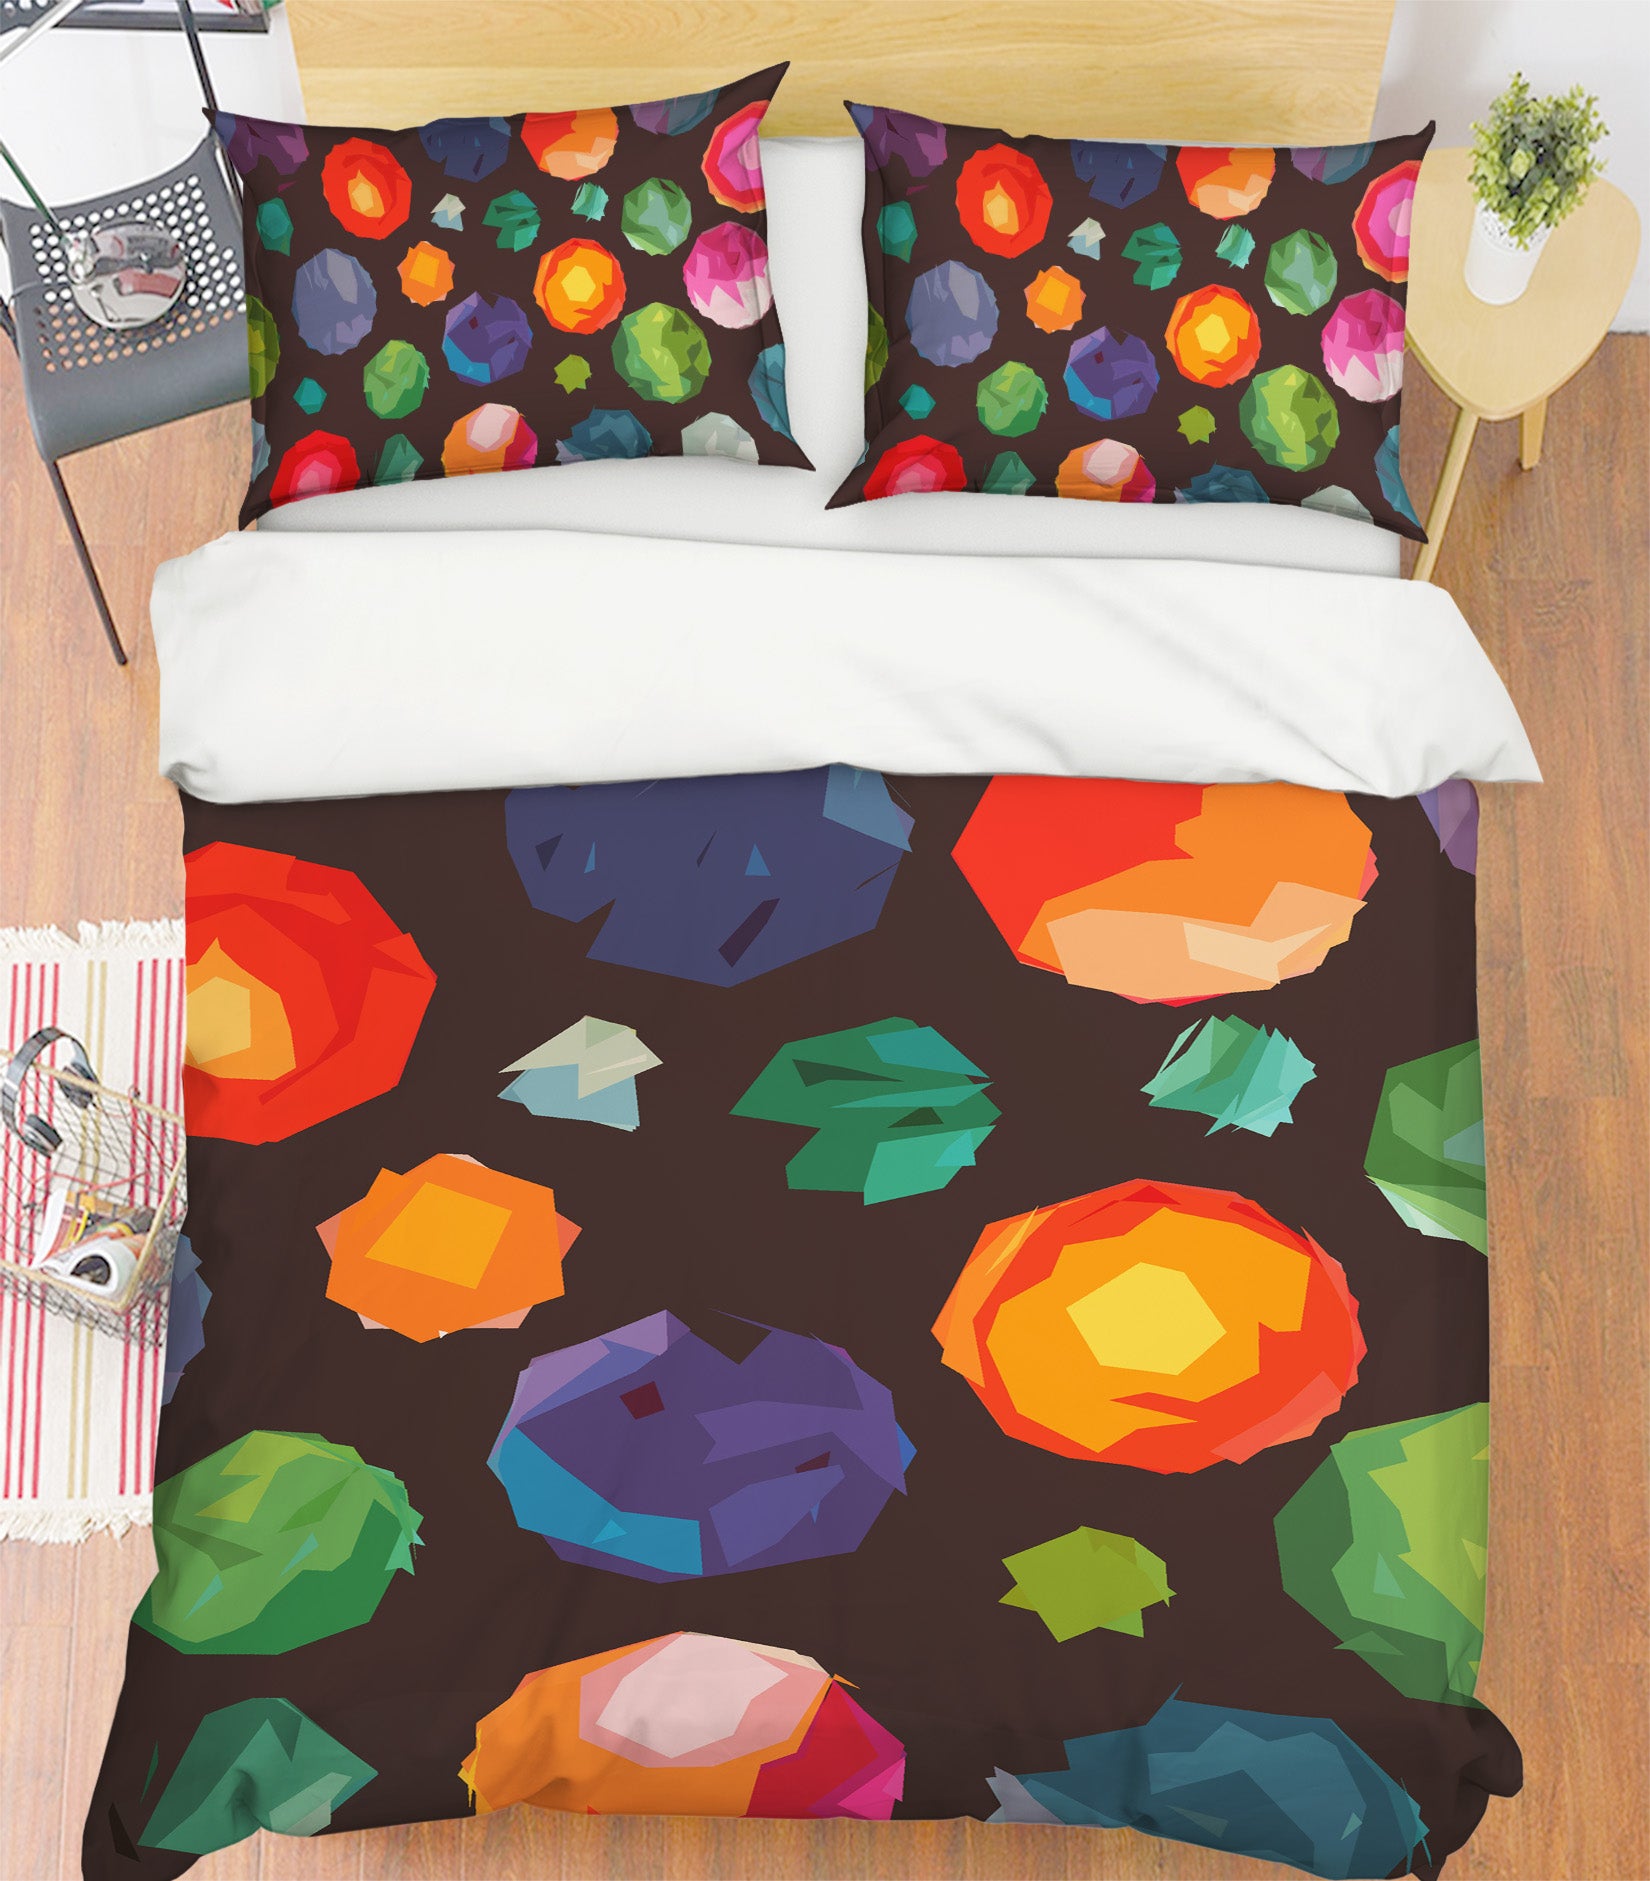 3D Colorful Balloons 2001 Shandra Smith Bedding Bed Pillowcases Quilt